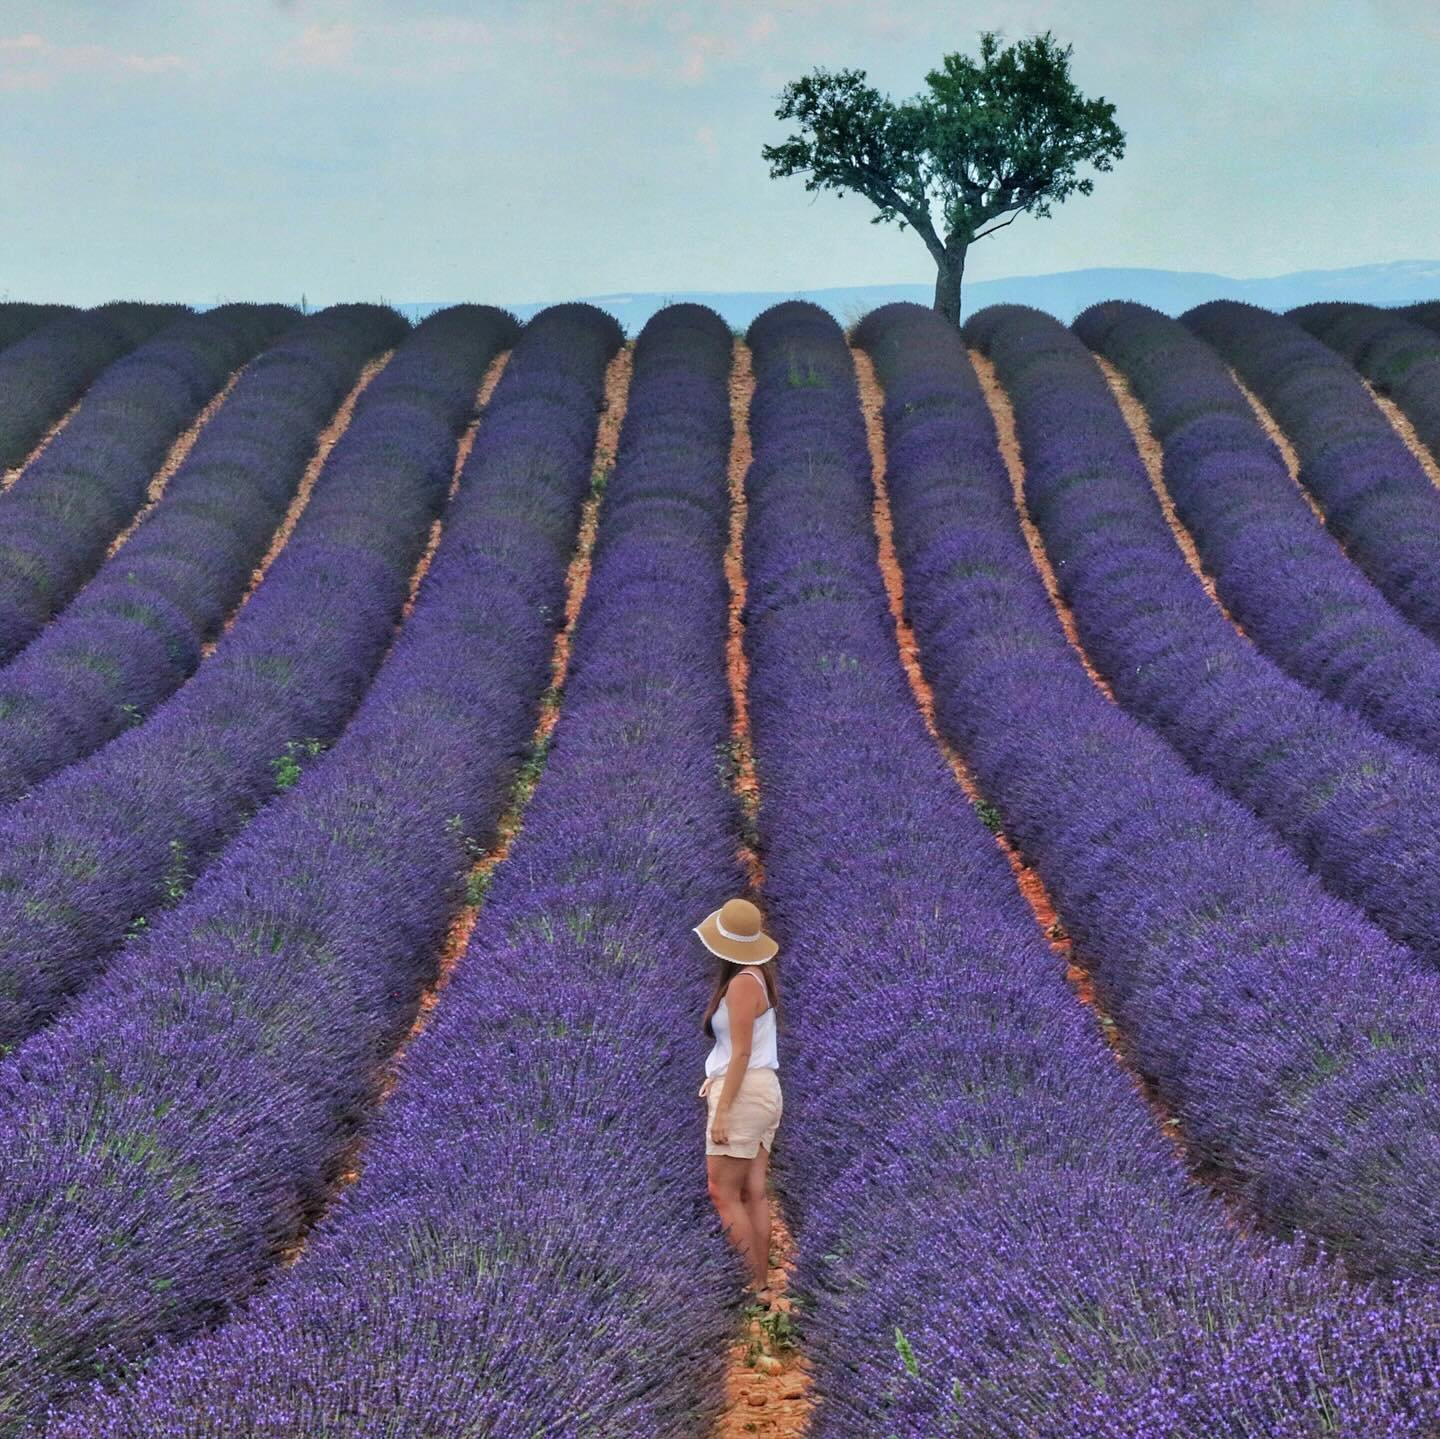 Lavender is synonymous with Provence, an aromatic purple haze made even more irresistible when Jacquemus paraded models down the purple fields a few years ago. Through the months of June and July the region is carpeted in this aromatic flower. A road